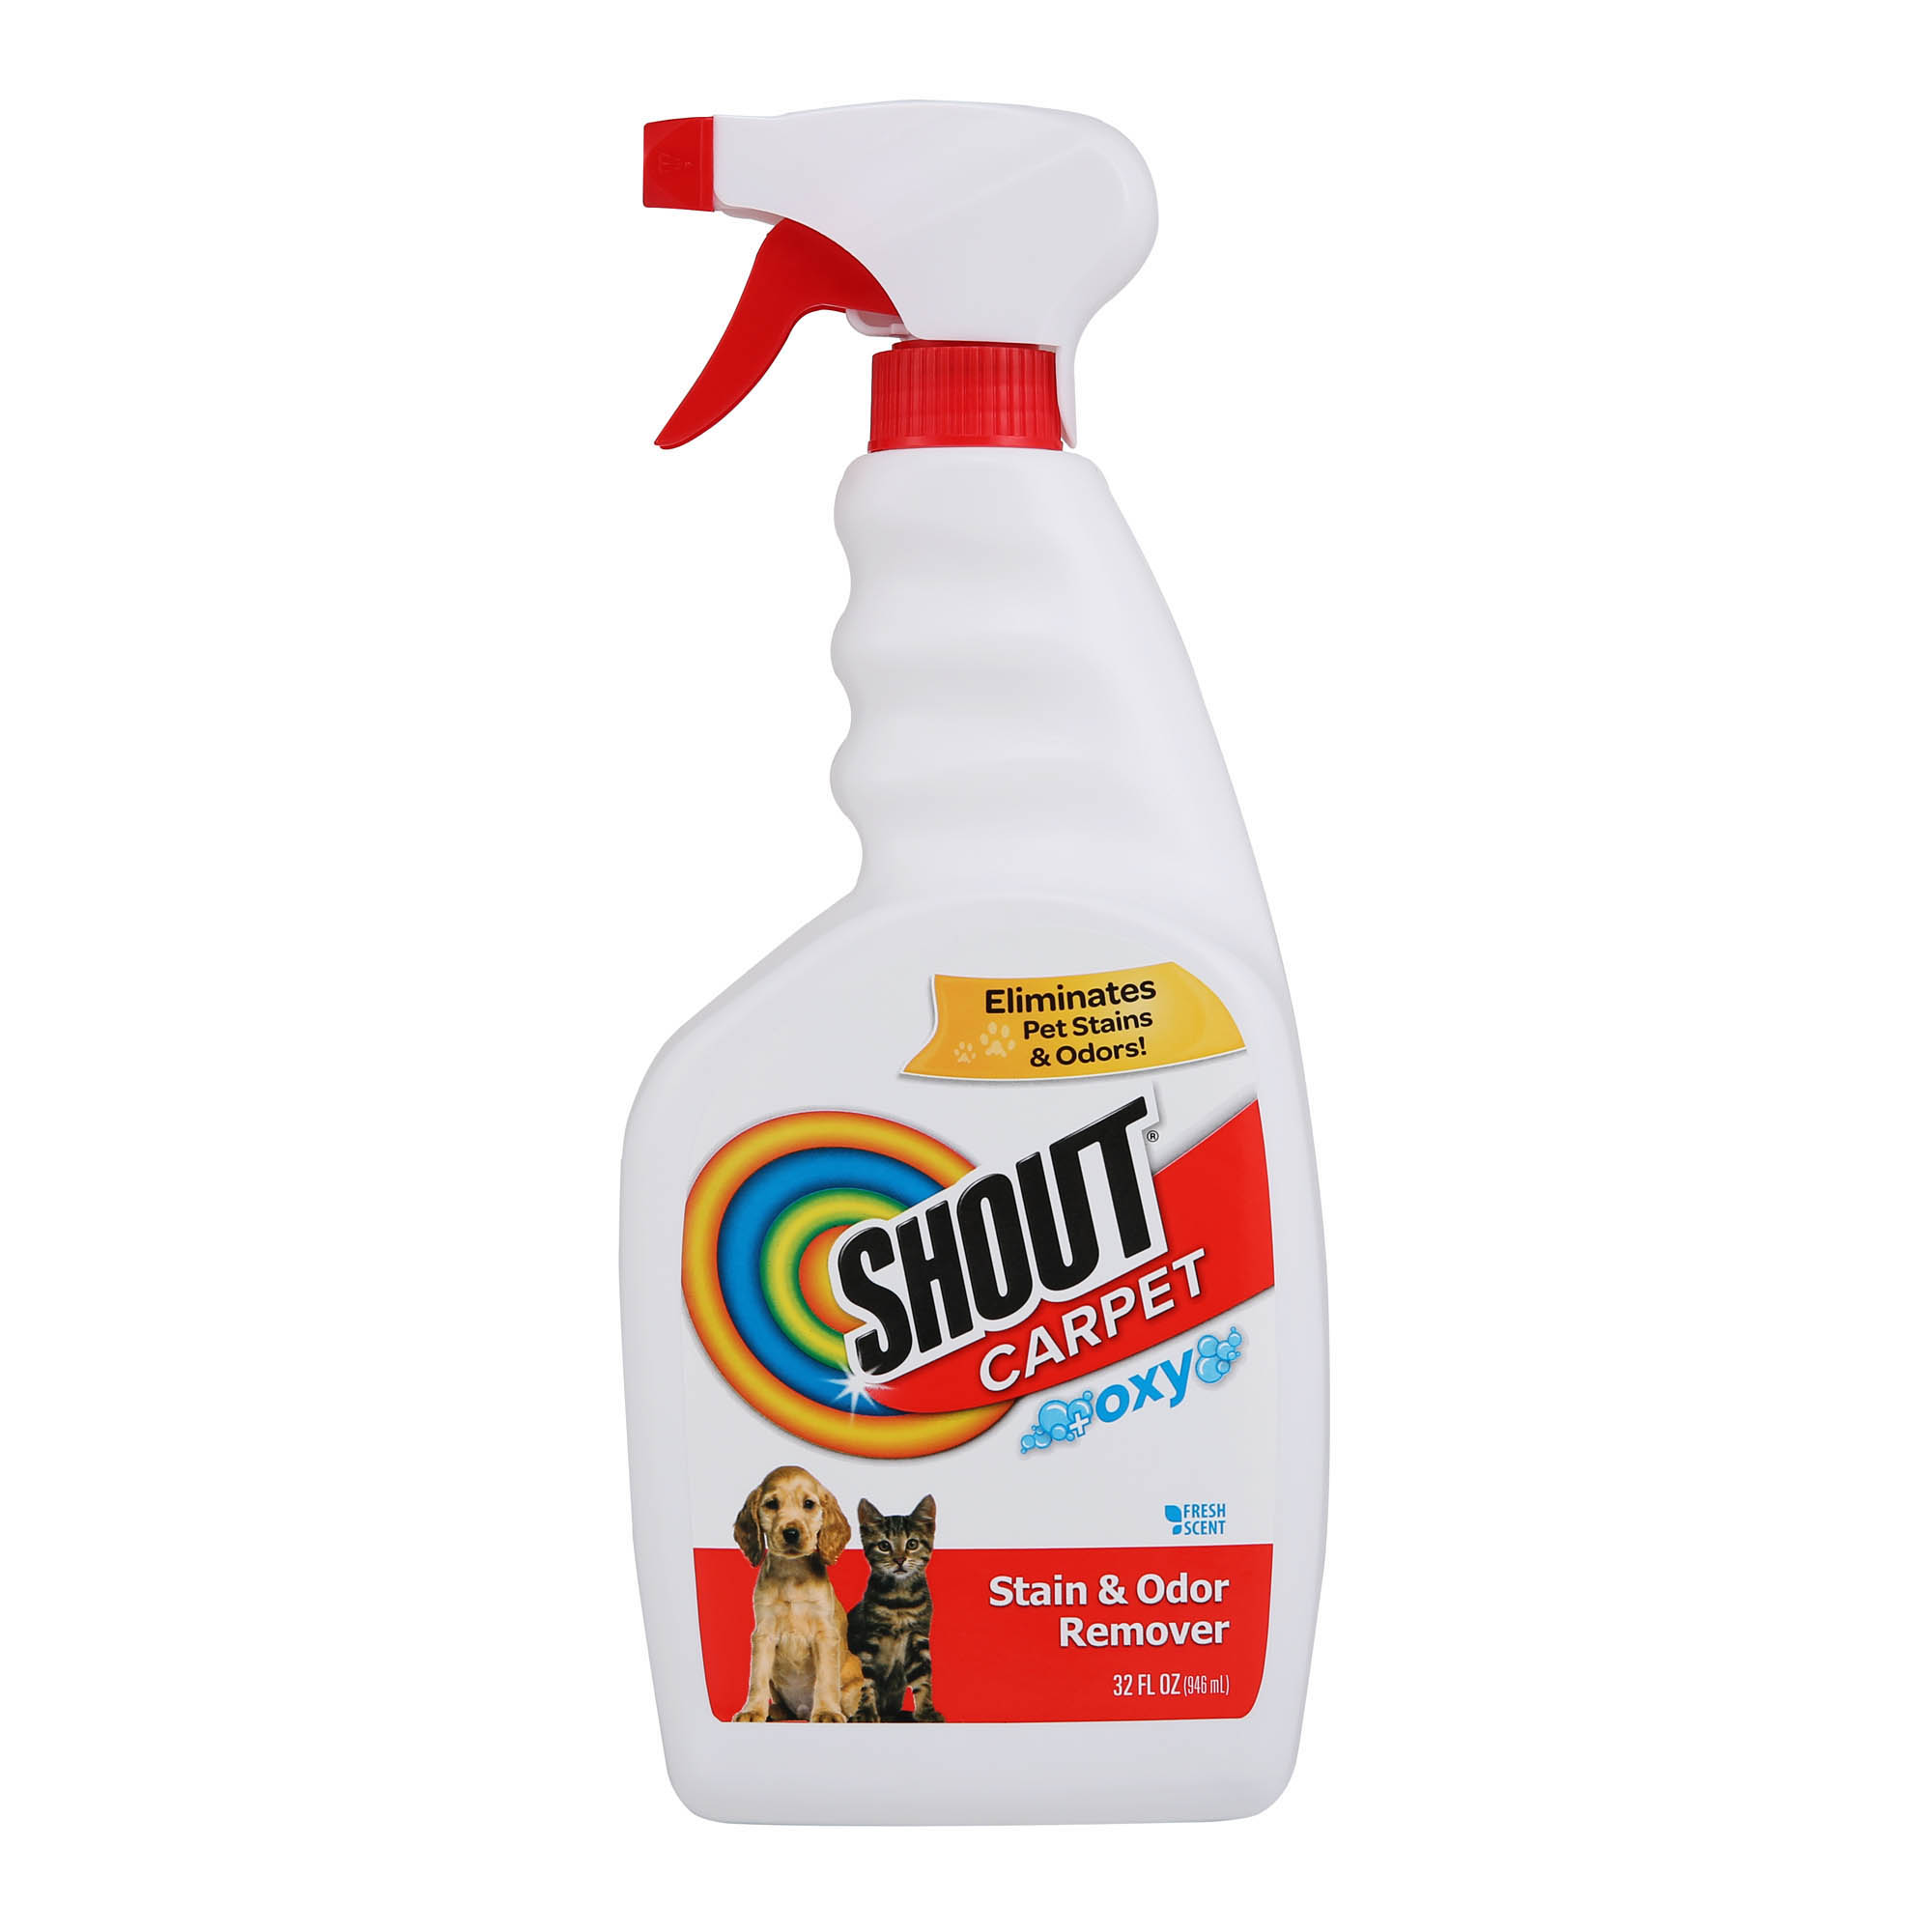 Shout Carpet Cleaning Spray with Oxy for Pet Stains and Odors, 32